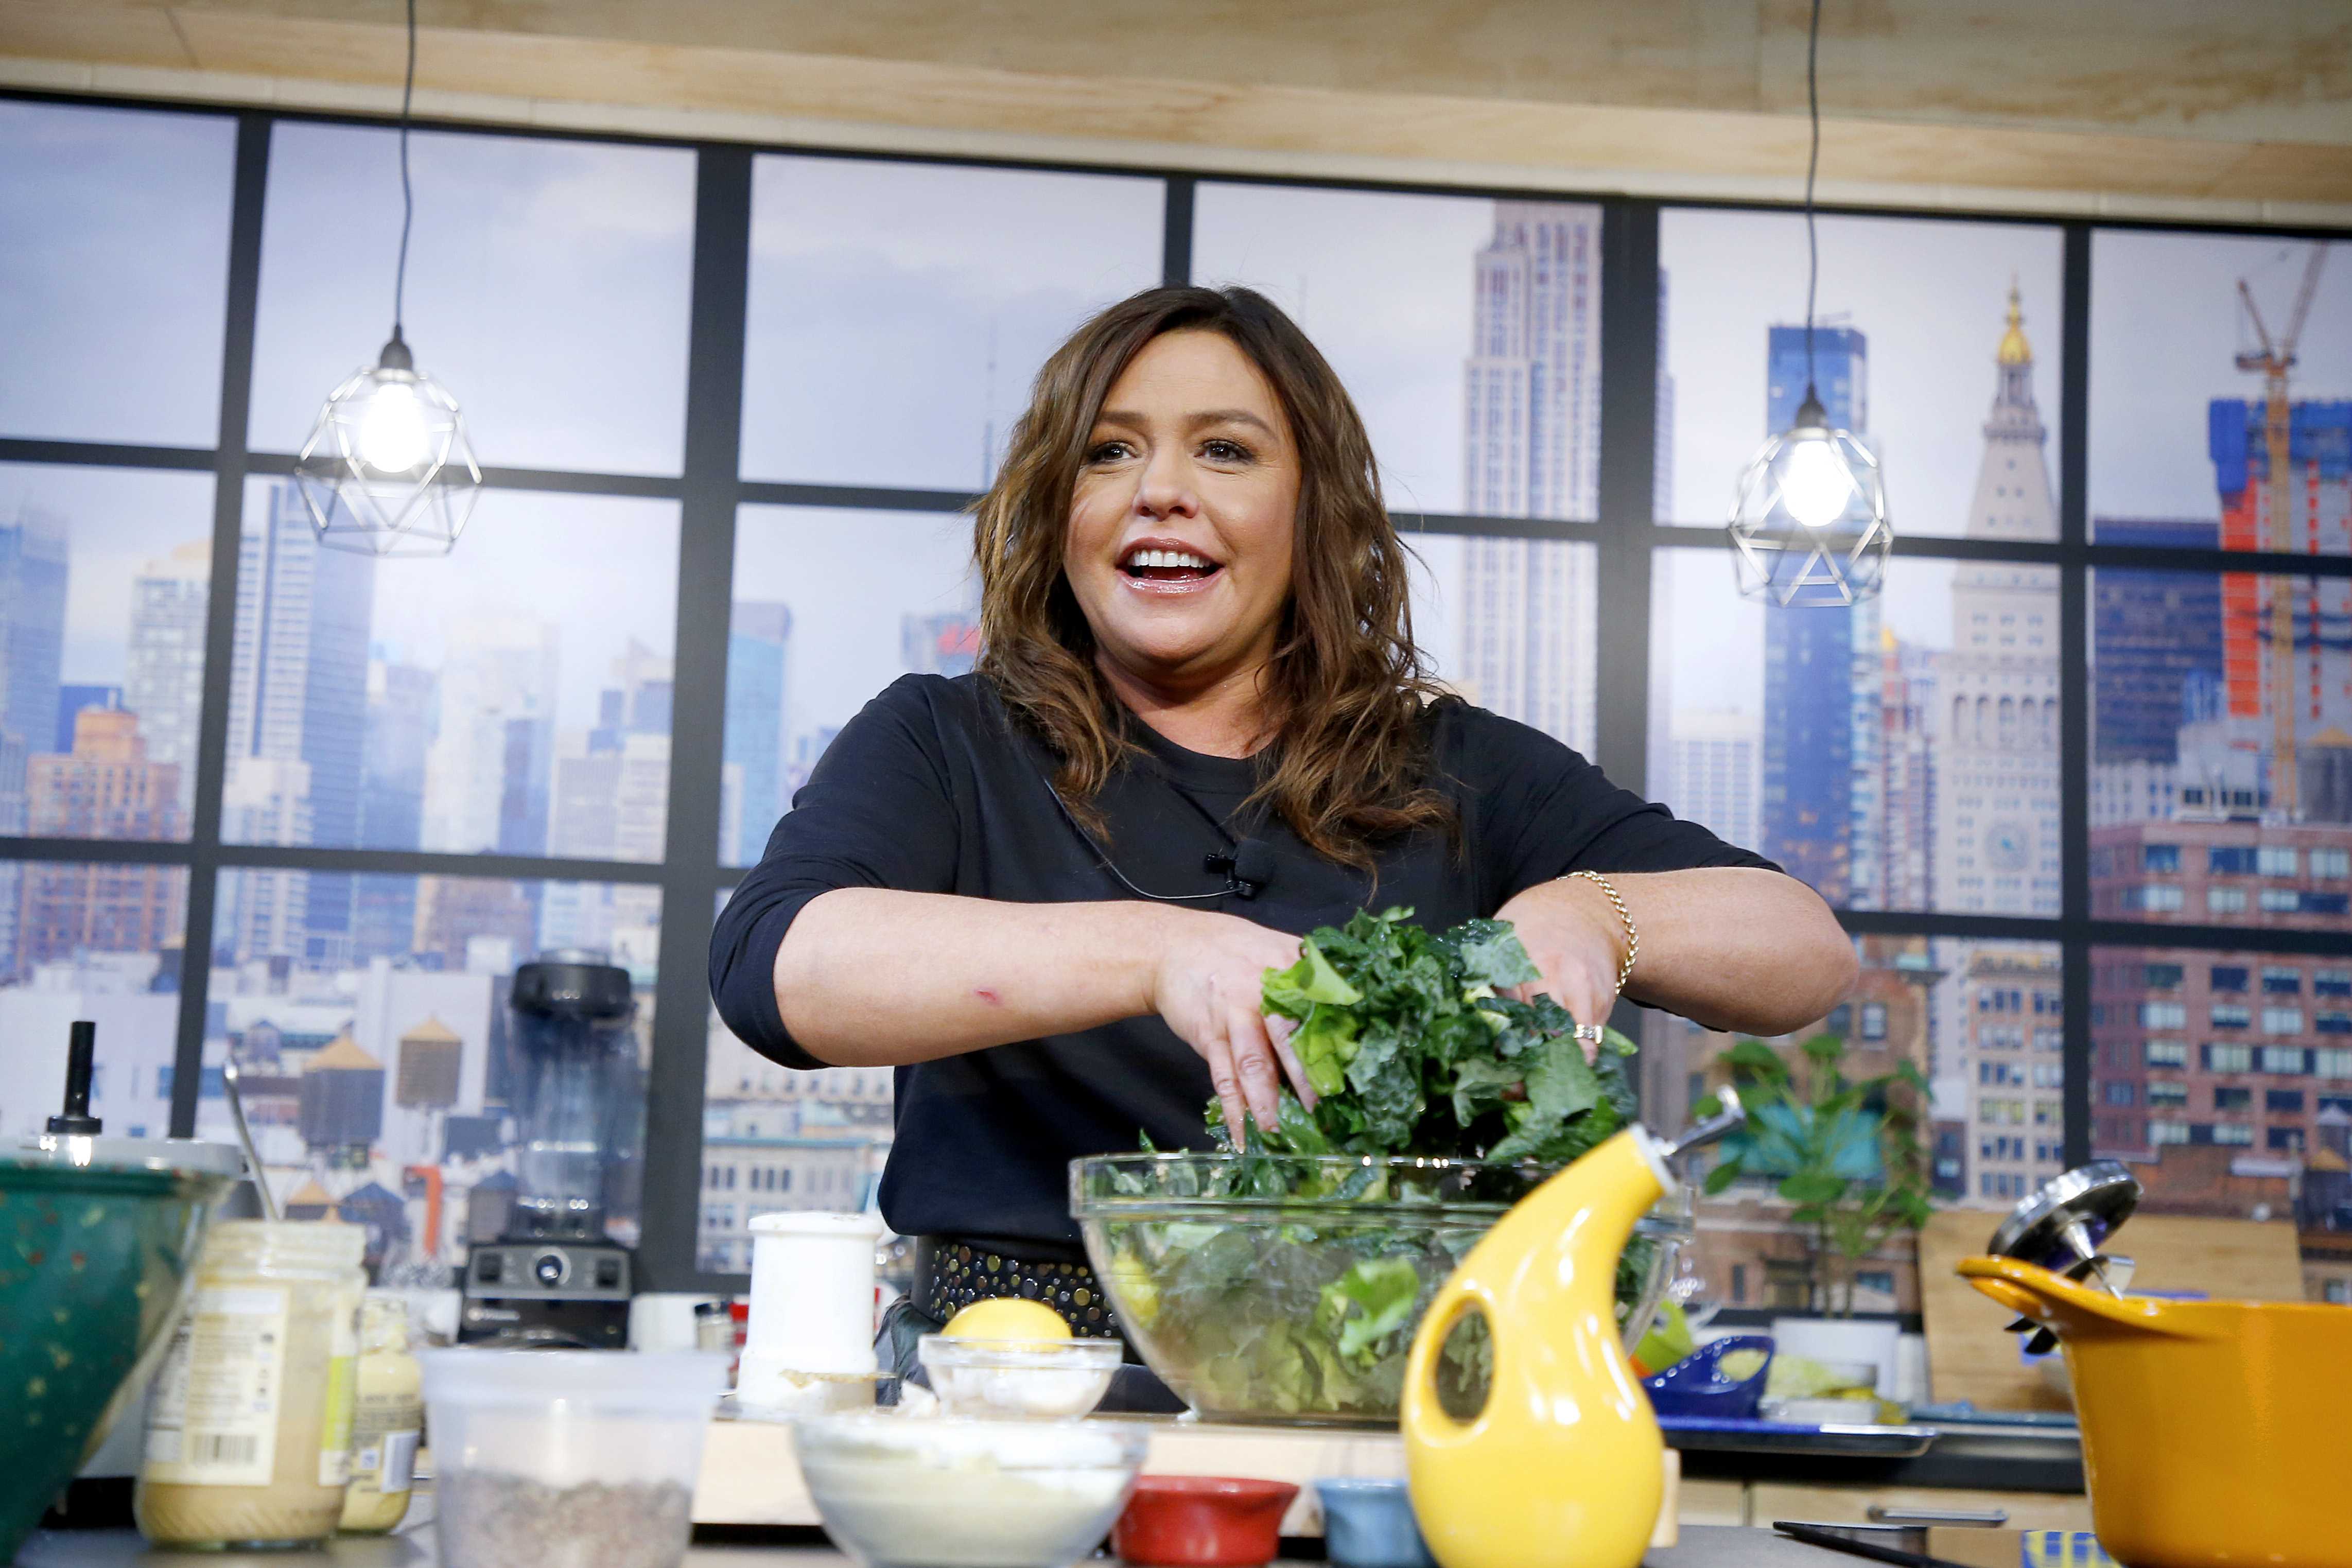 Celebrity chef Rachael Ray tosses a salad during a 2019 Food Network event